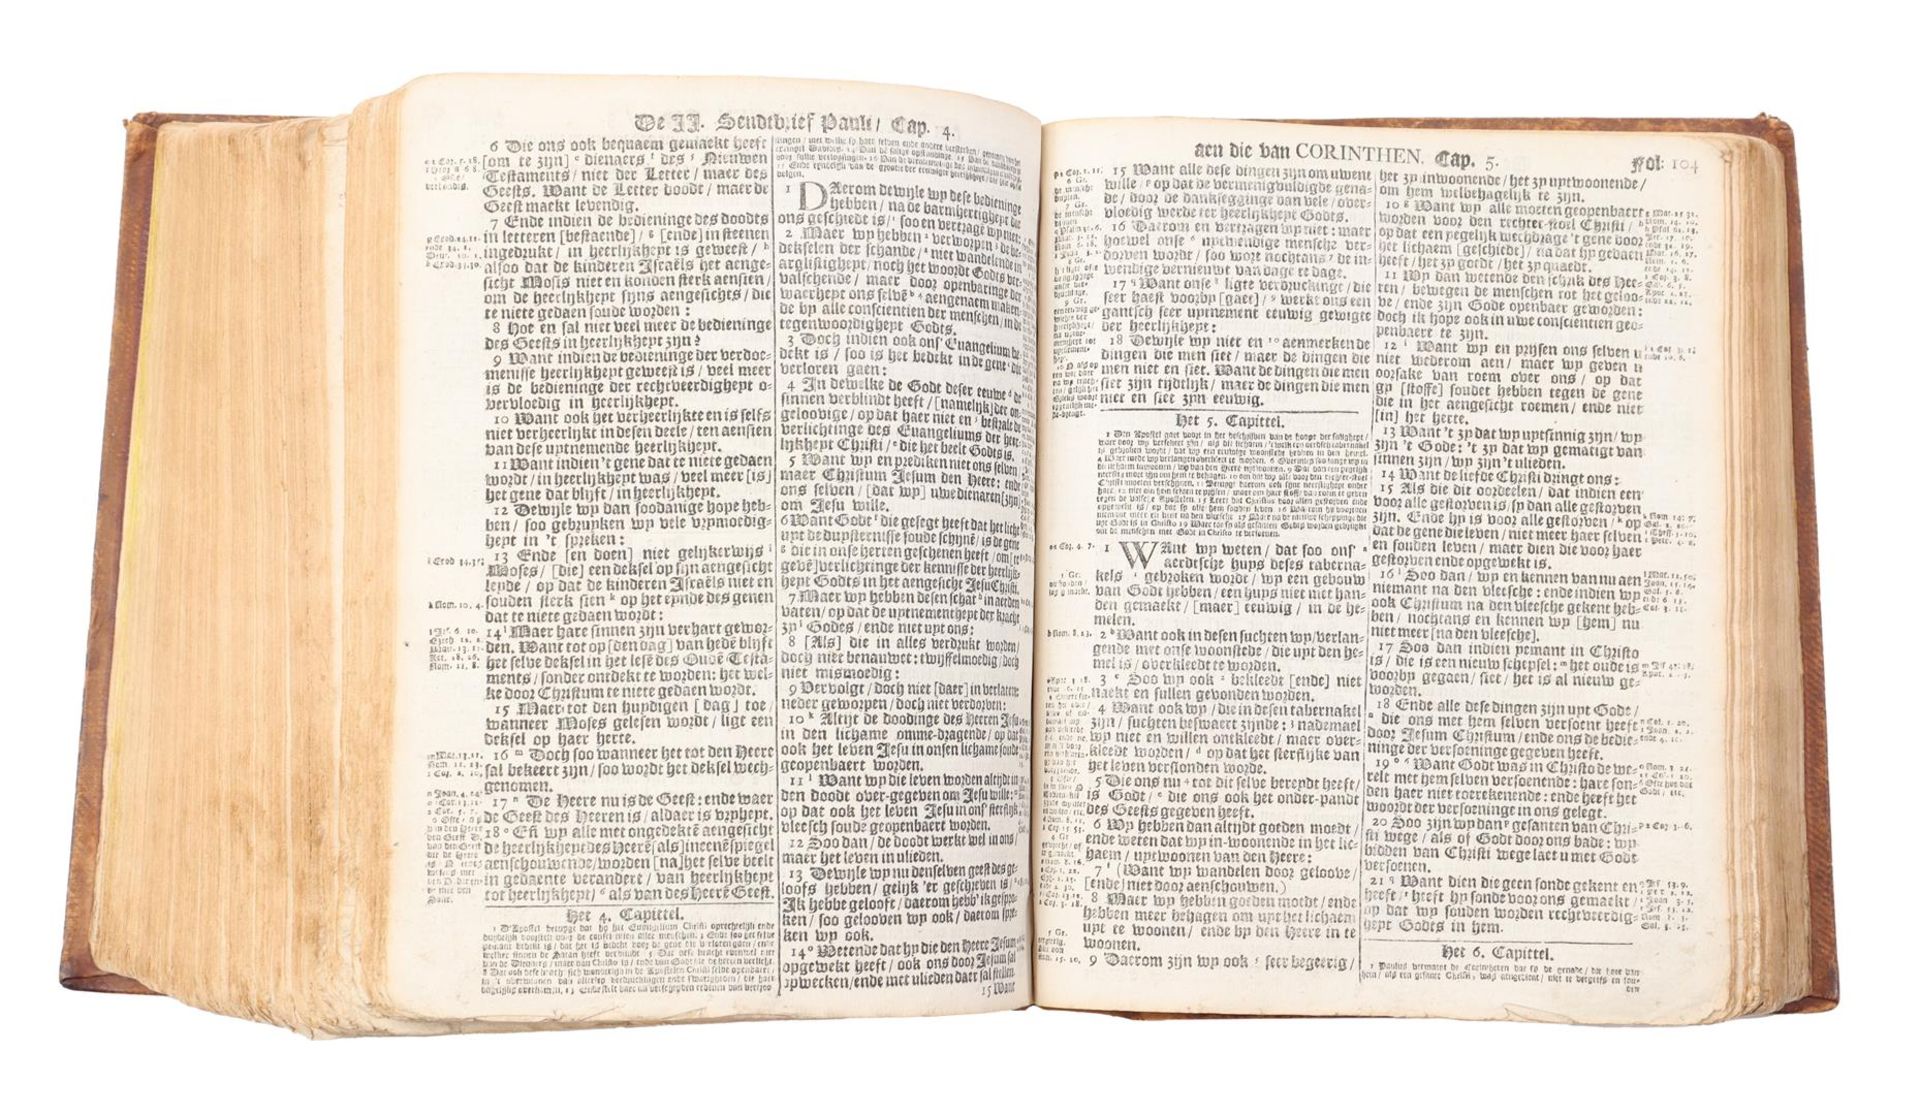 Bible contains - Image 3 of 4